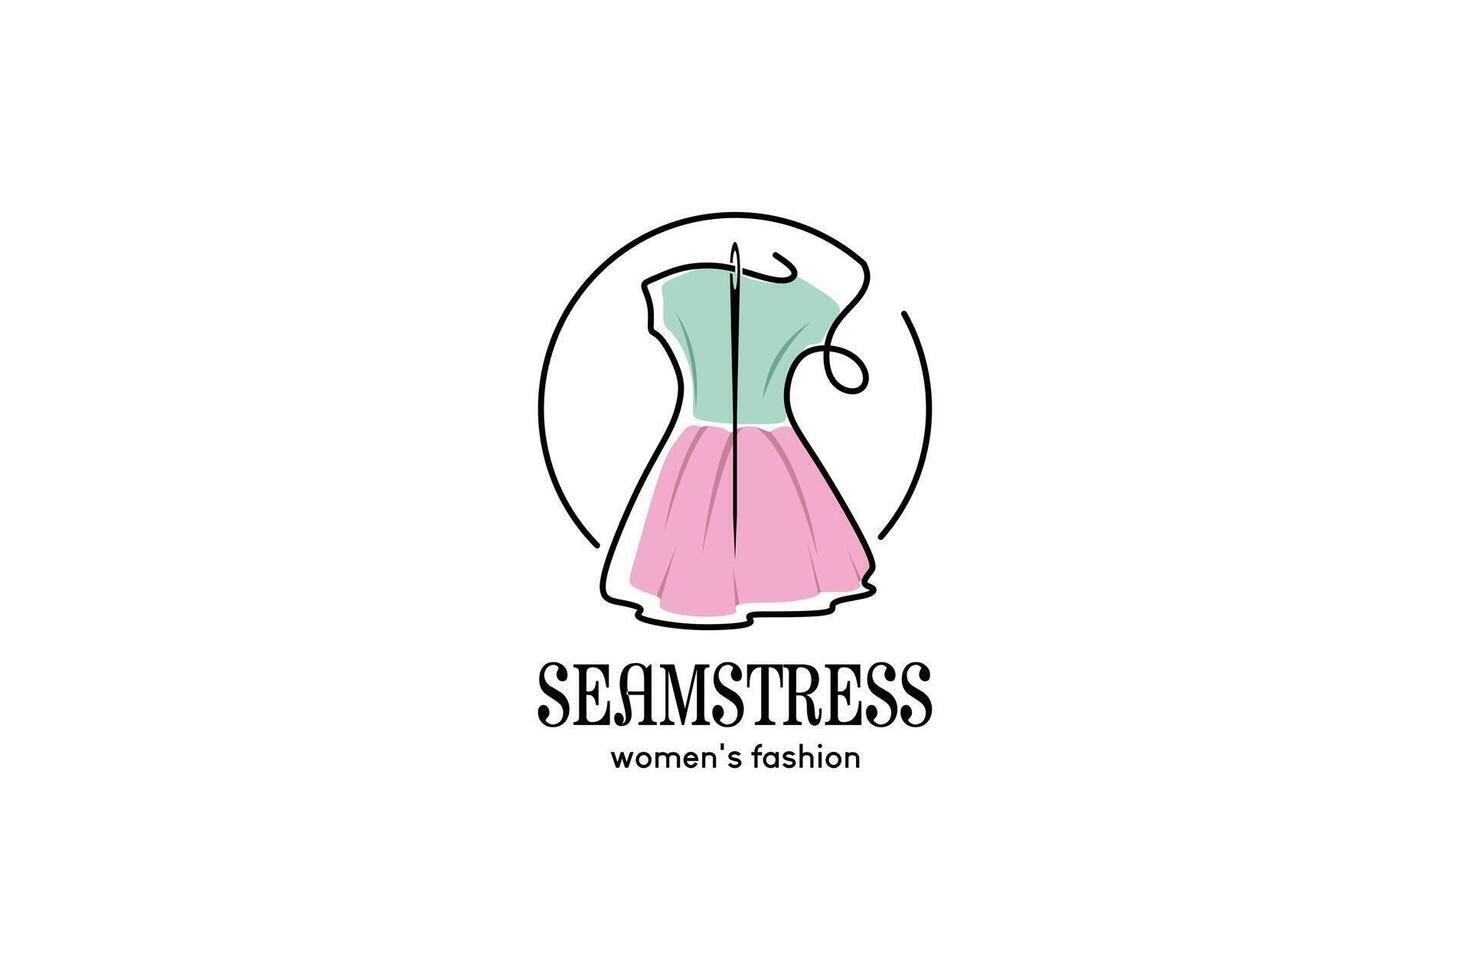 Tailor logo design with needle and thread in women fashion dress concept vector